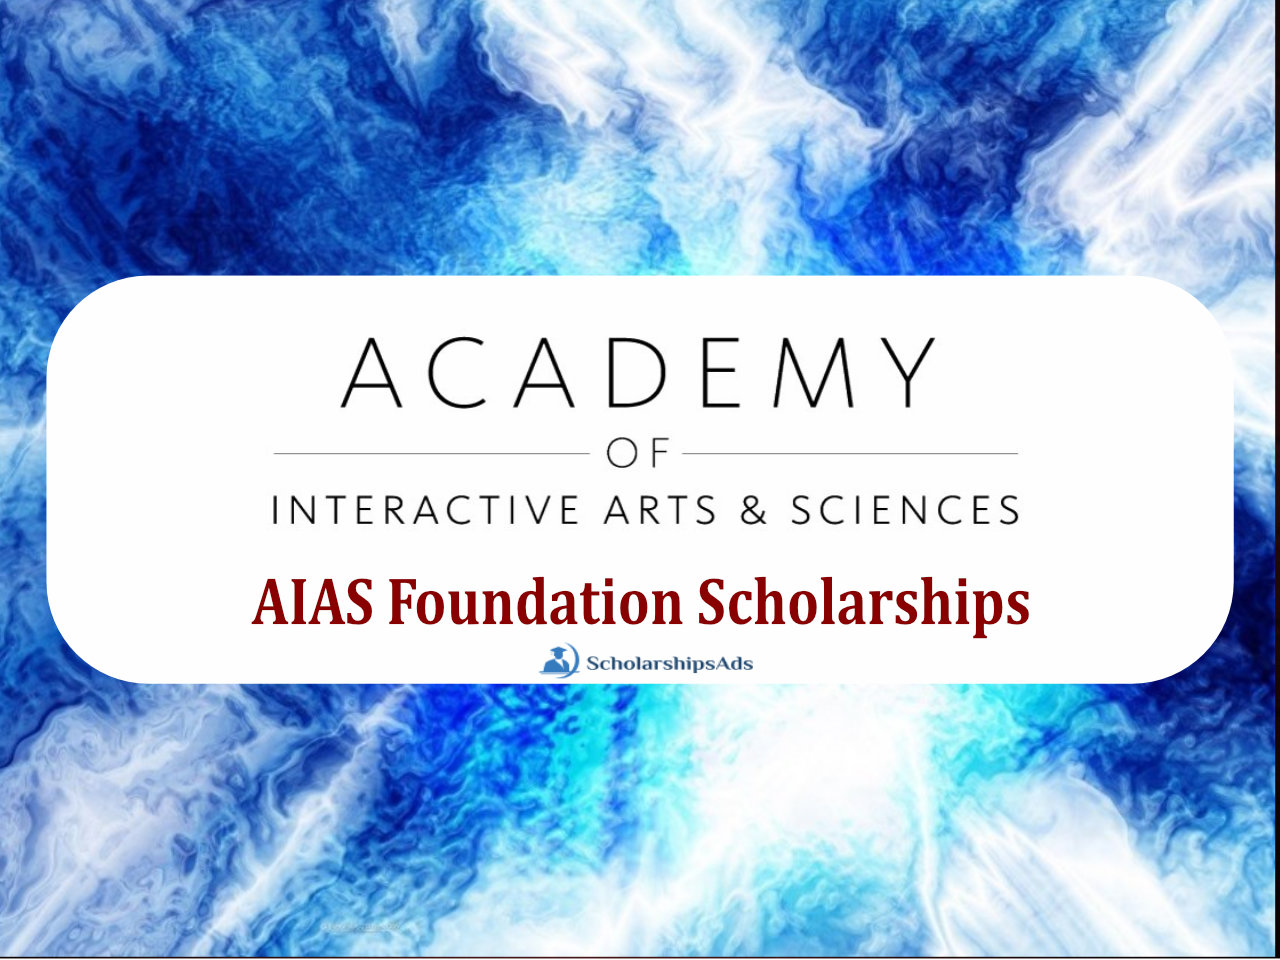 AIAS Foundation Scholarships.